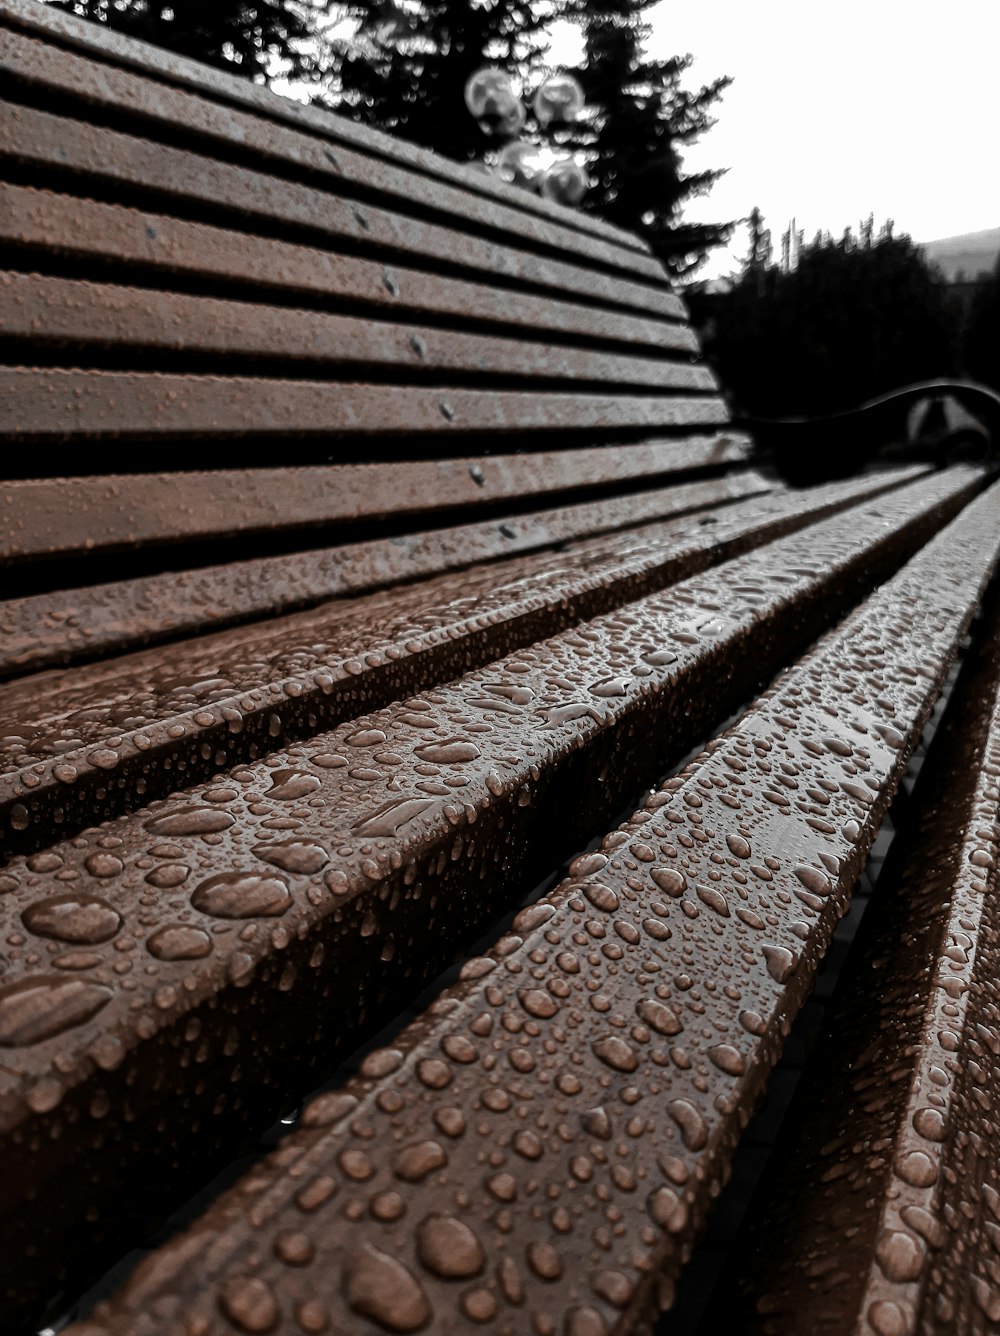 a close up of a wooden bench with water droplets on it